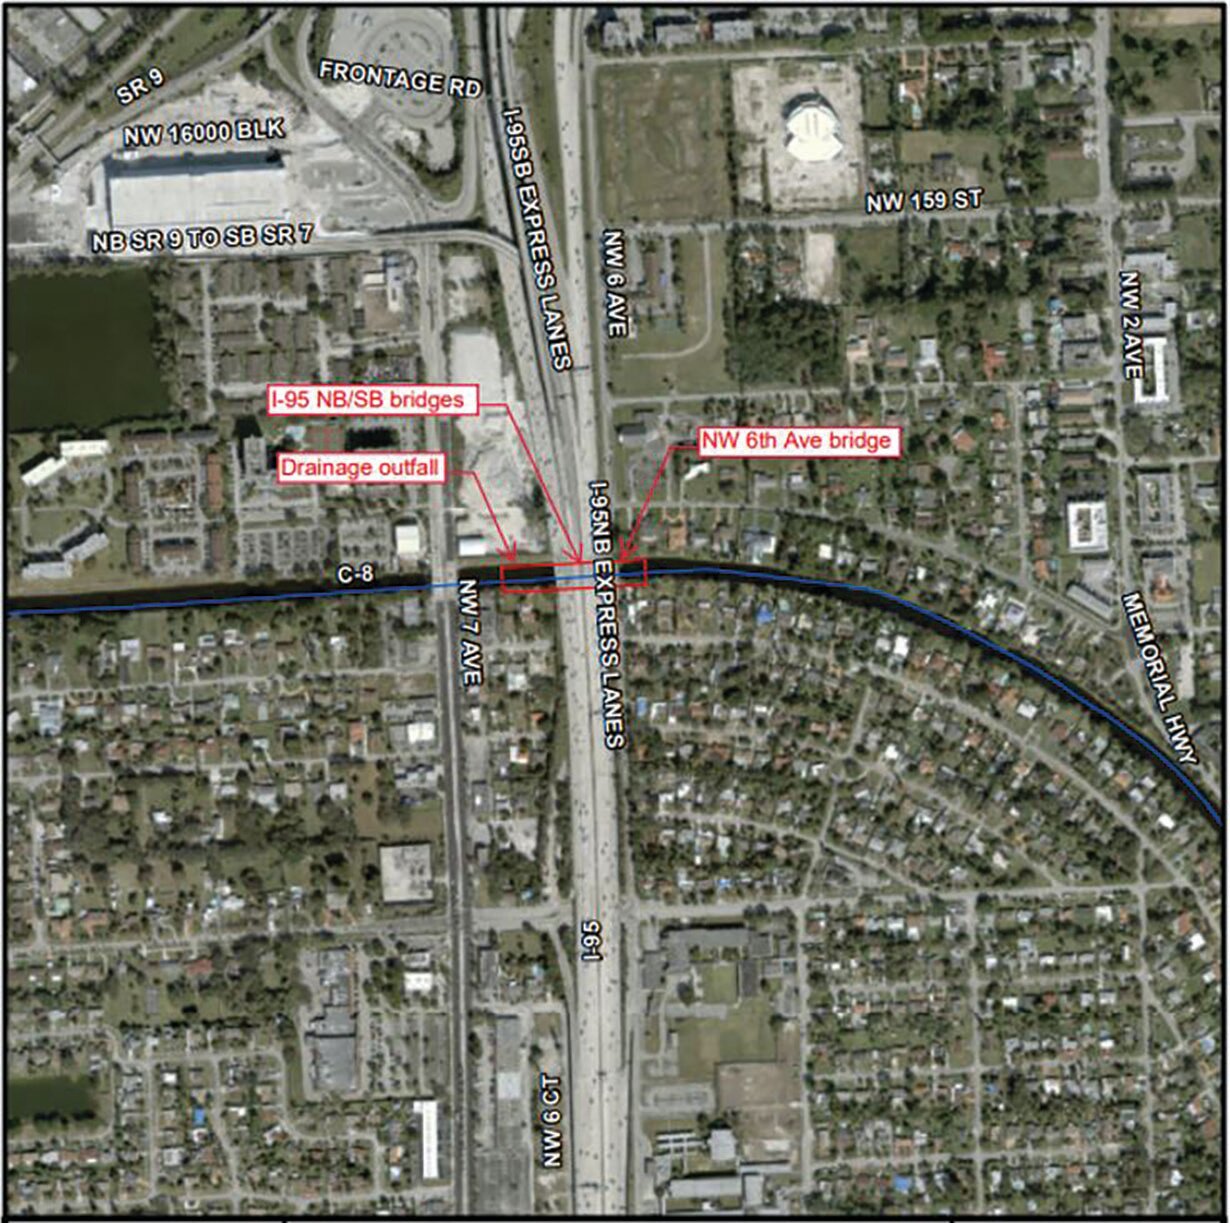 Aerial map of bridges and infrastructure to be replaced as part of the proposed Golden Glades Interchange improvements.